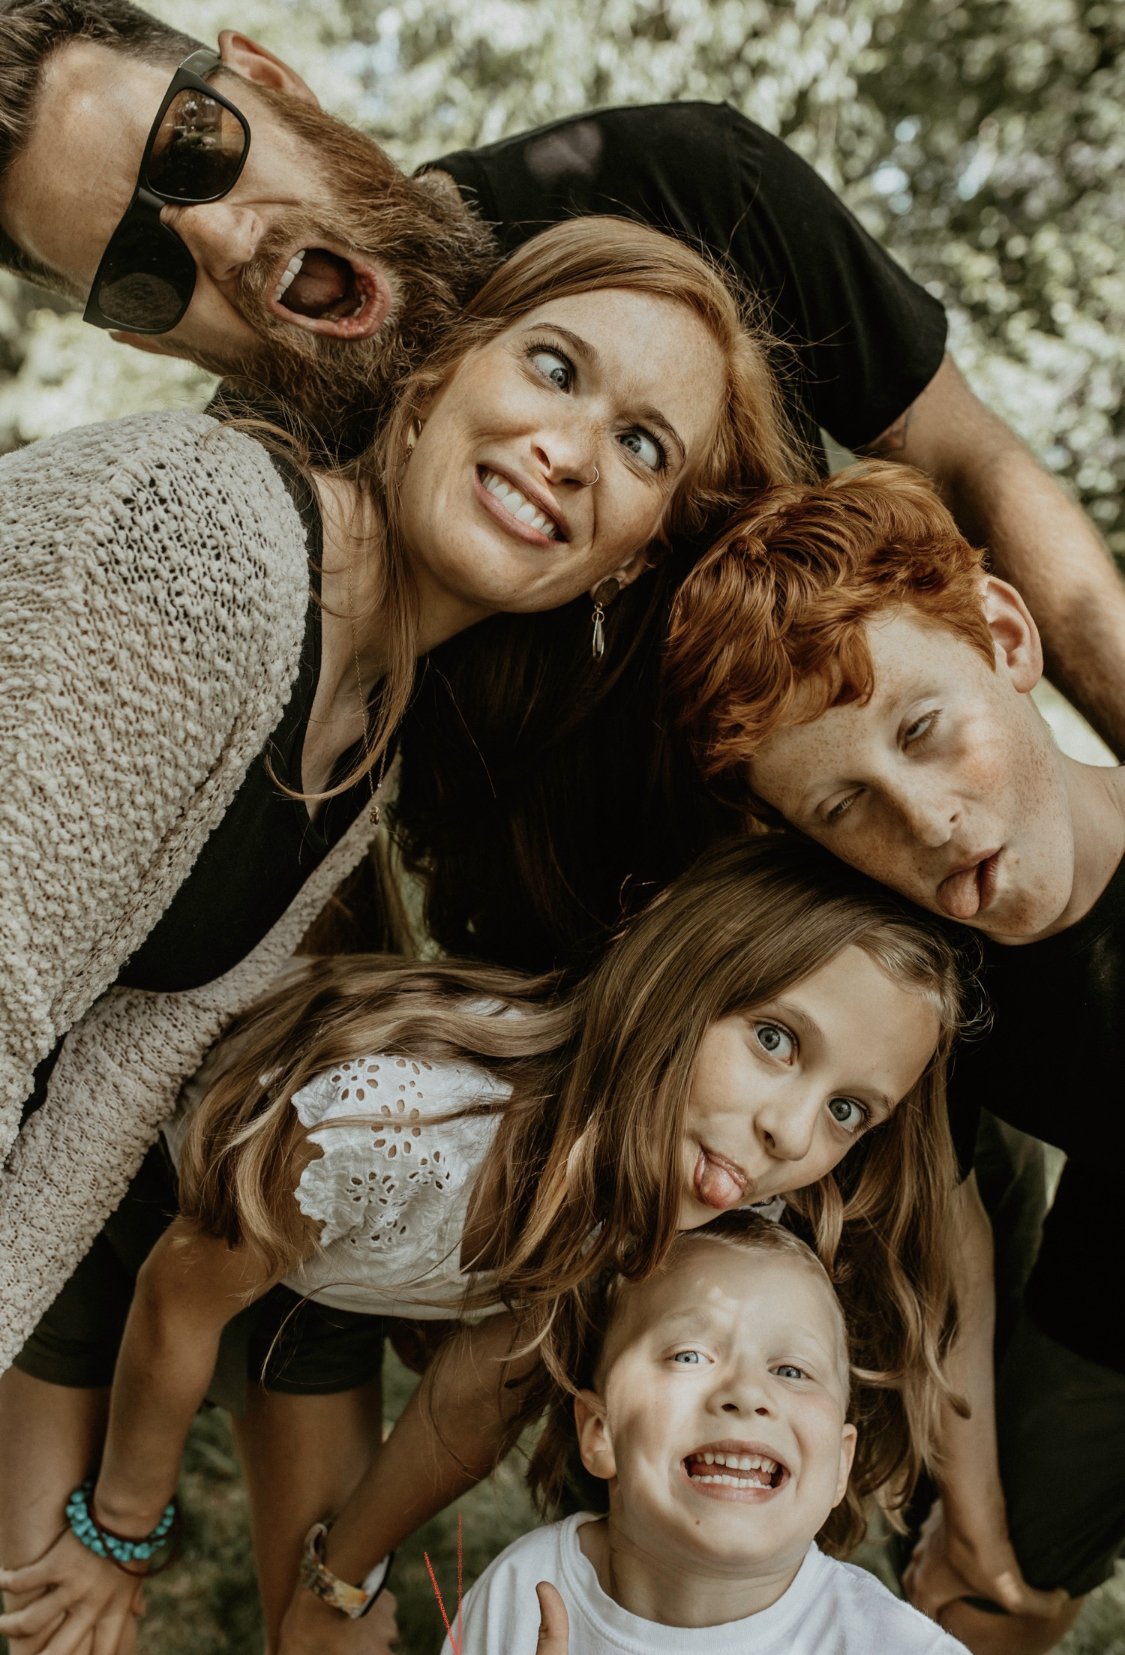 10 Group Photo Poses and Ideas For Family and Wedding Photography - Adorama